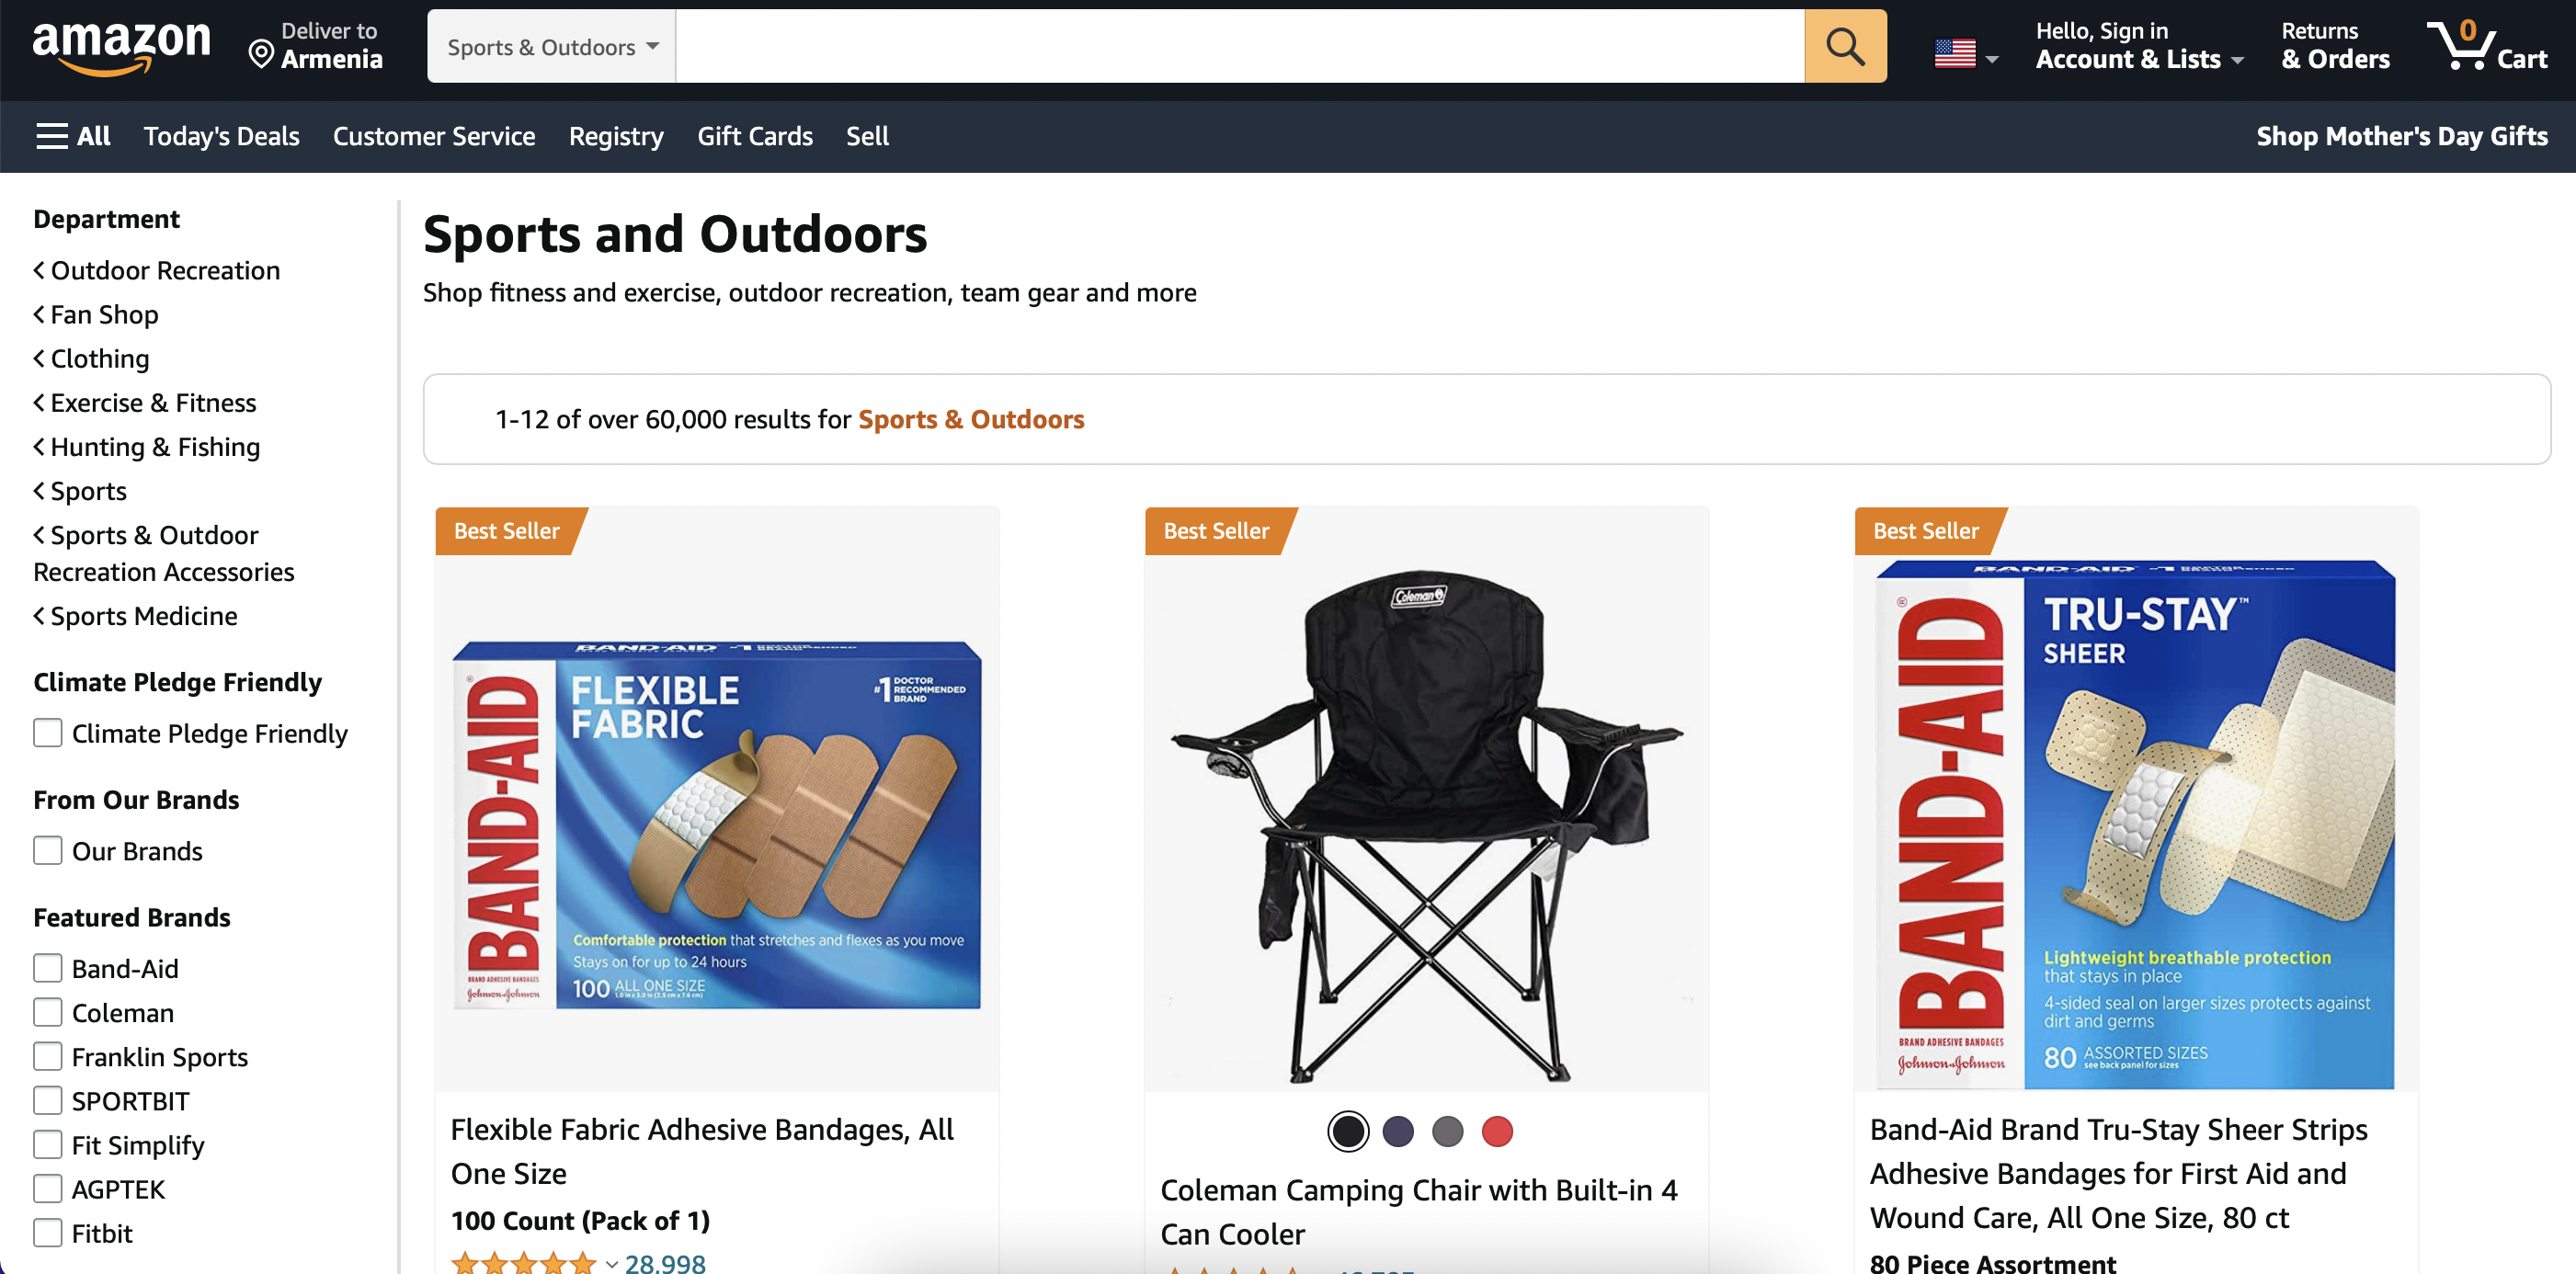 Top products for sale on Amazon (p 2)